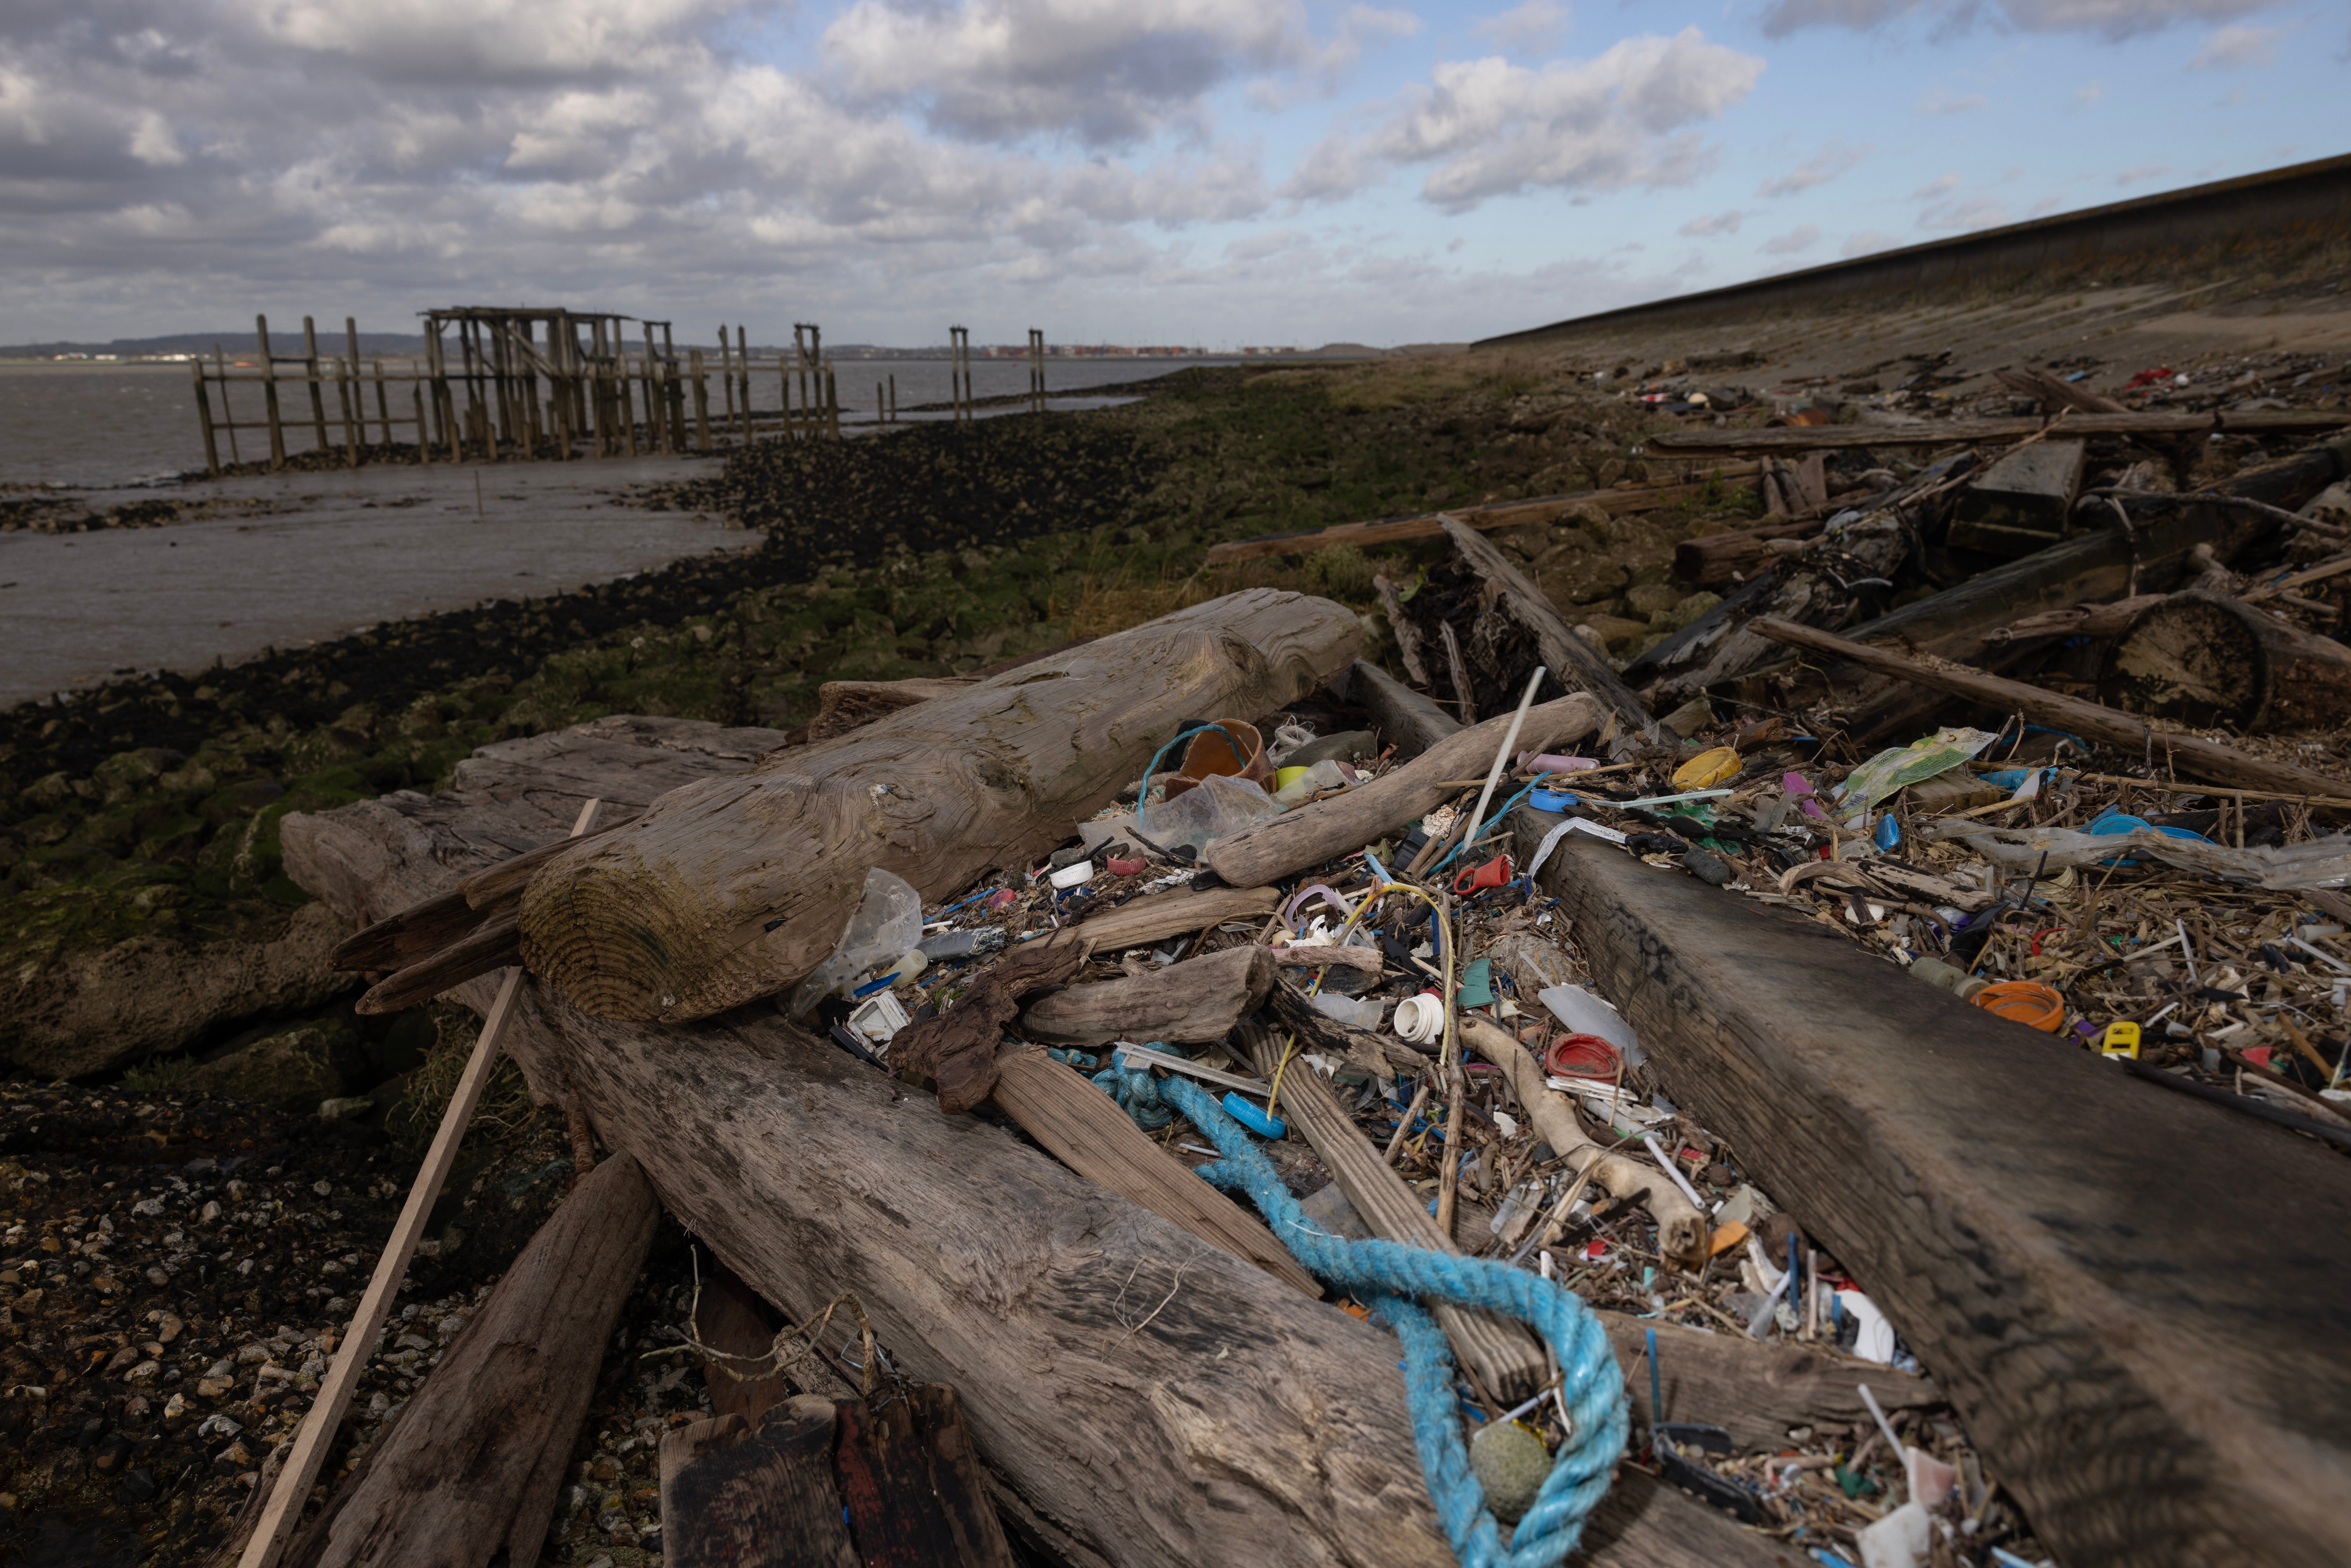 Plastics and other detritus line the shore of the Thames estuary on Friday at Cliffe, north Kent